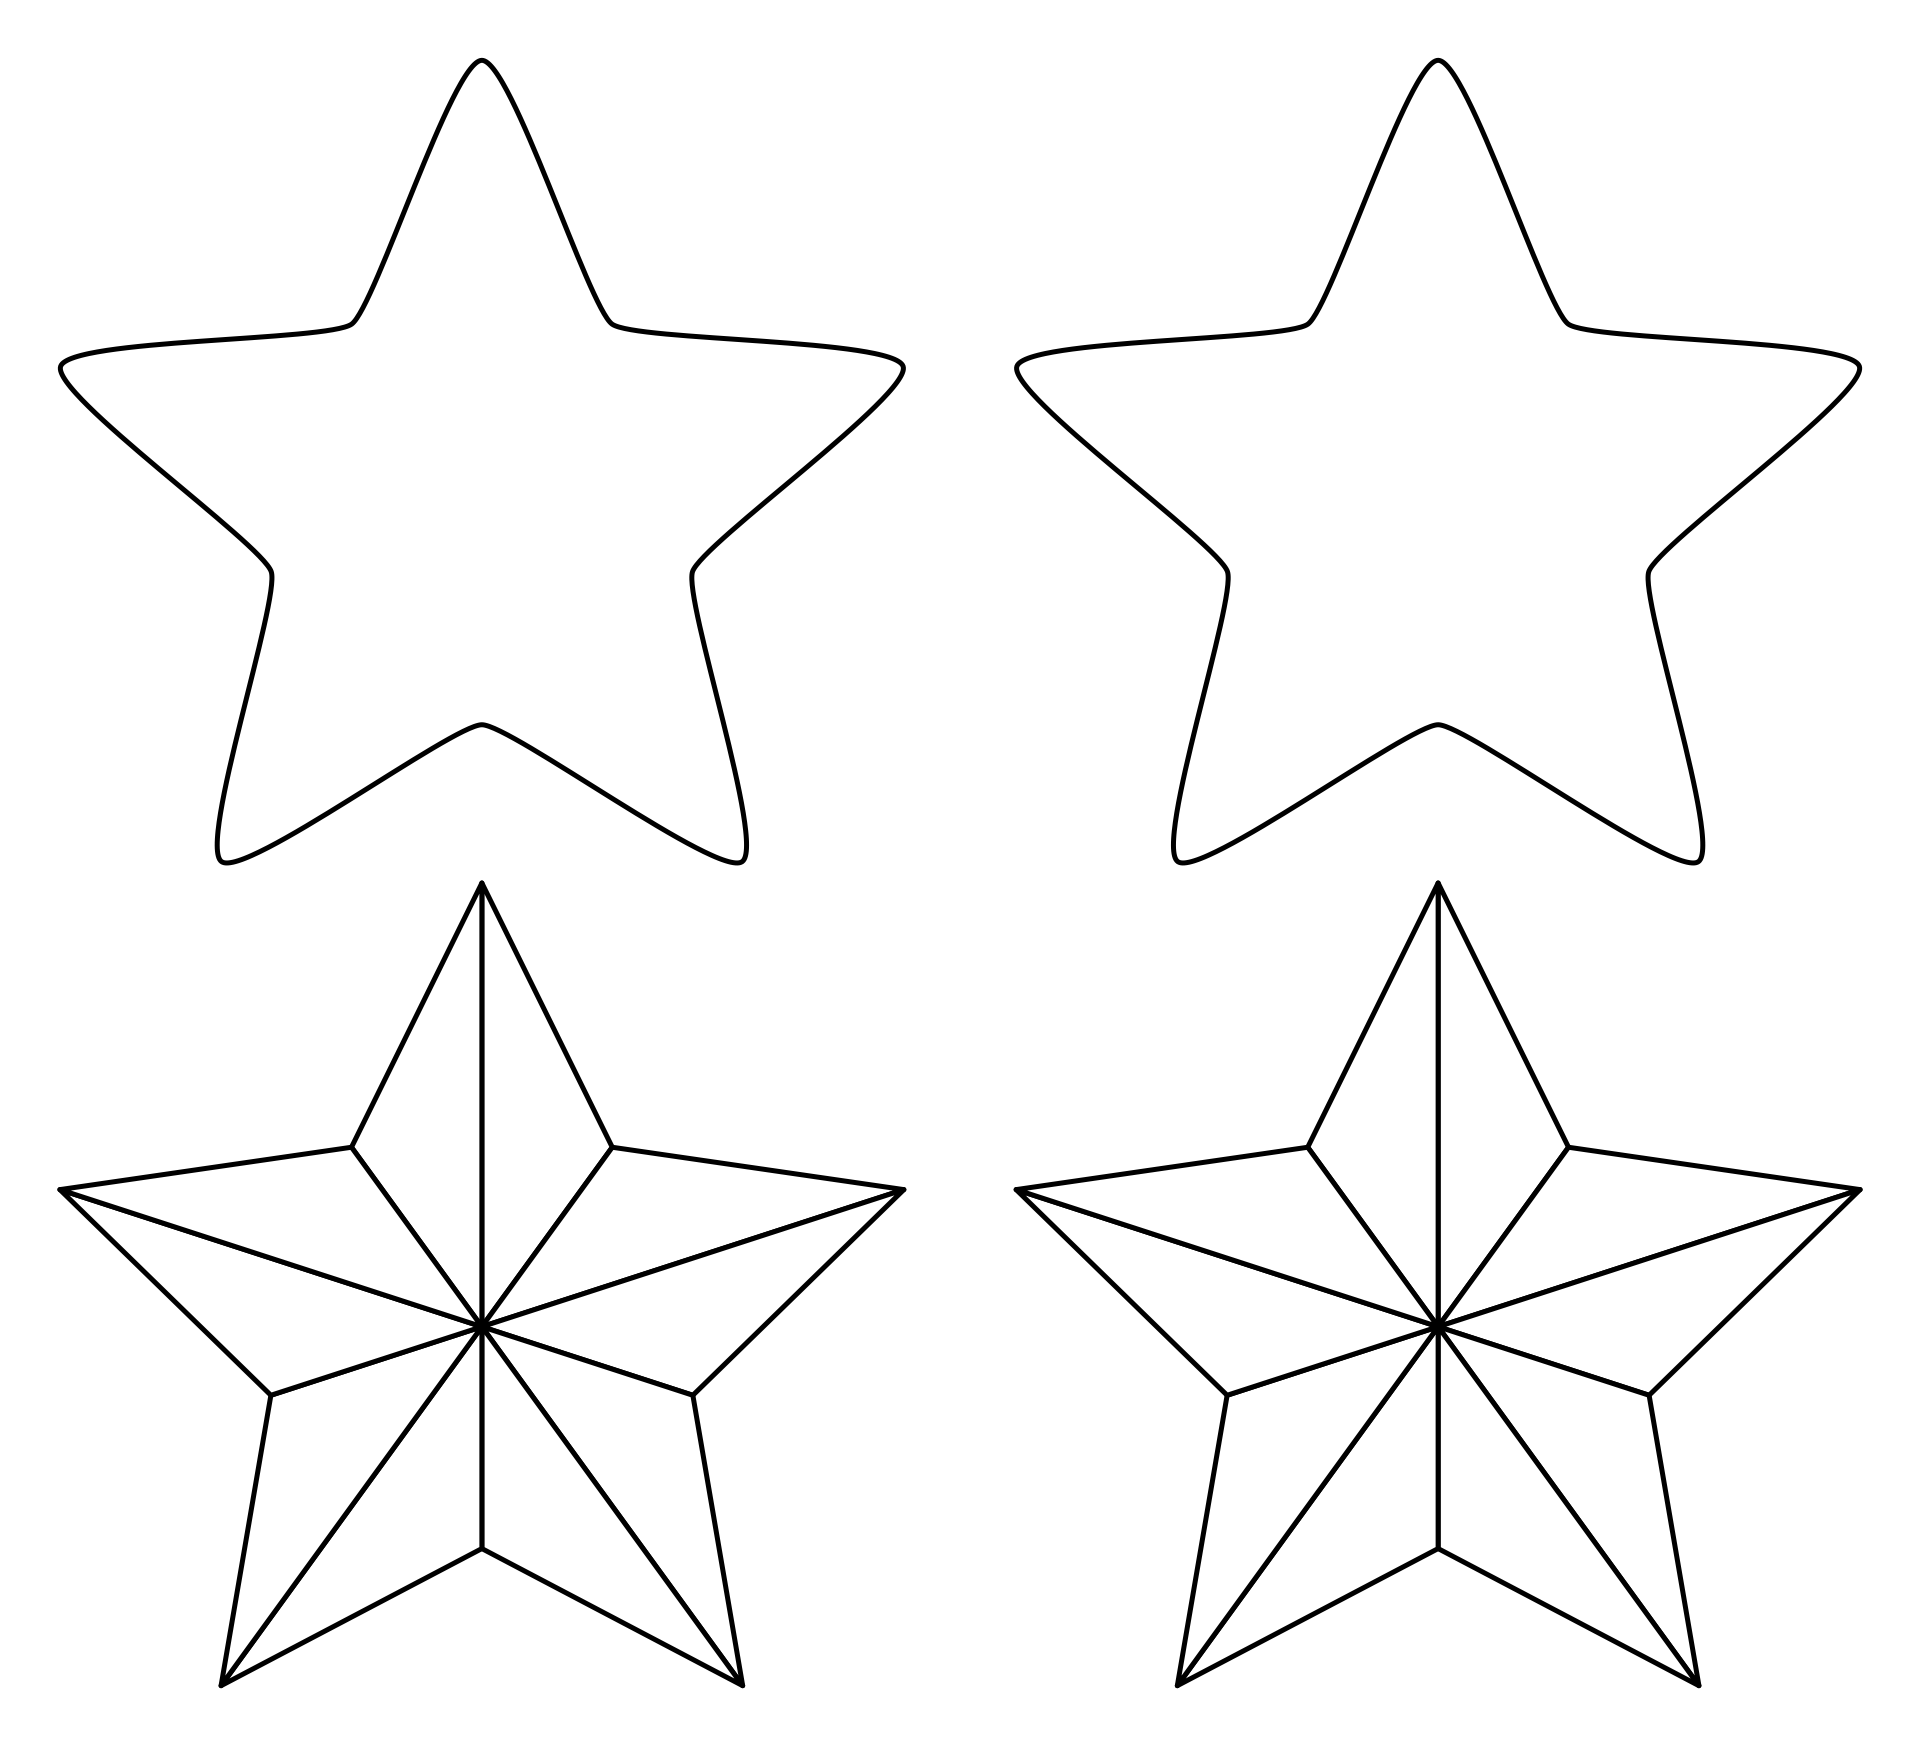 5 Best Images of Large Star Stencil Printable Large Star Template, 5